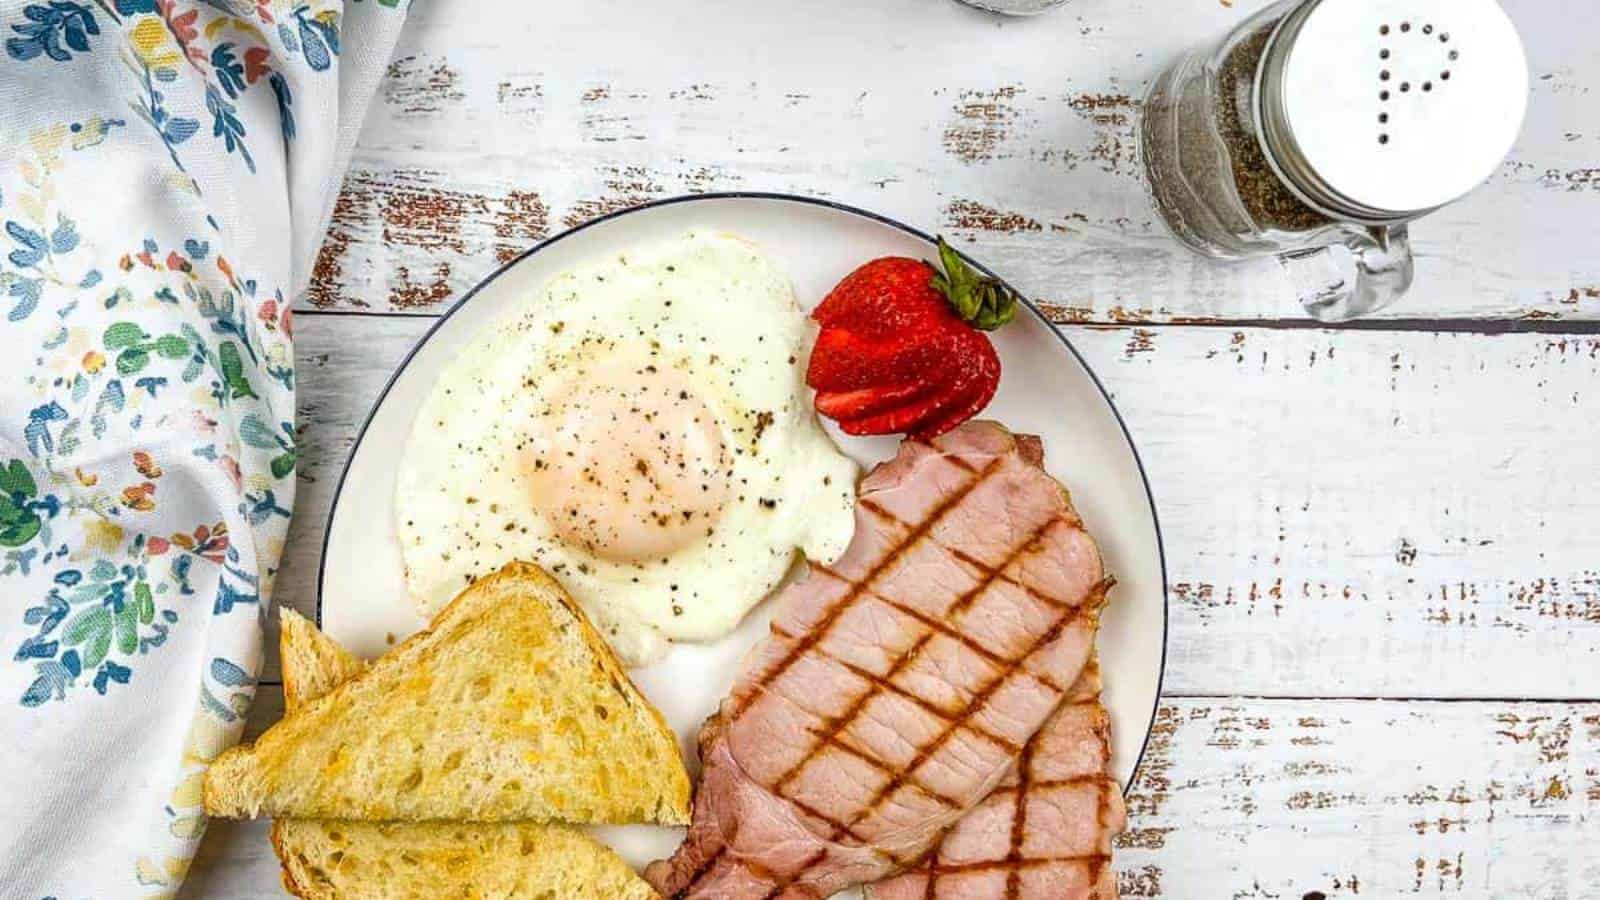 A plate with back bacon, eggs and toast.